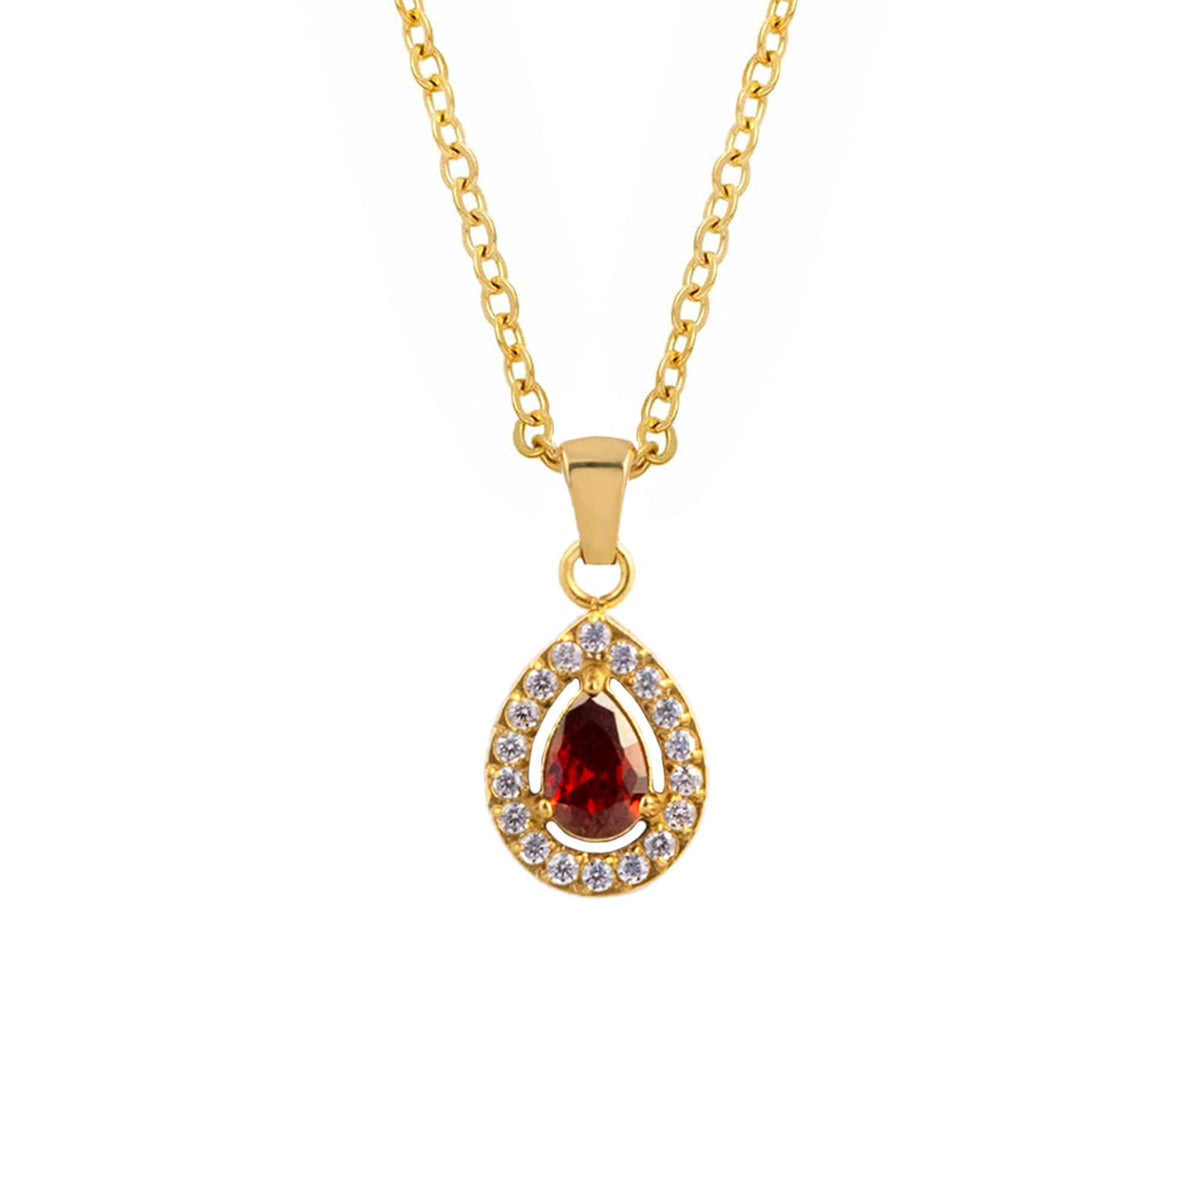 BohoMoon Stainless Steel Scarlet Necklace Gold